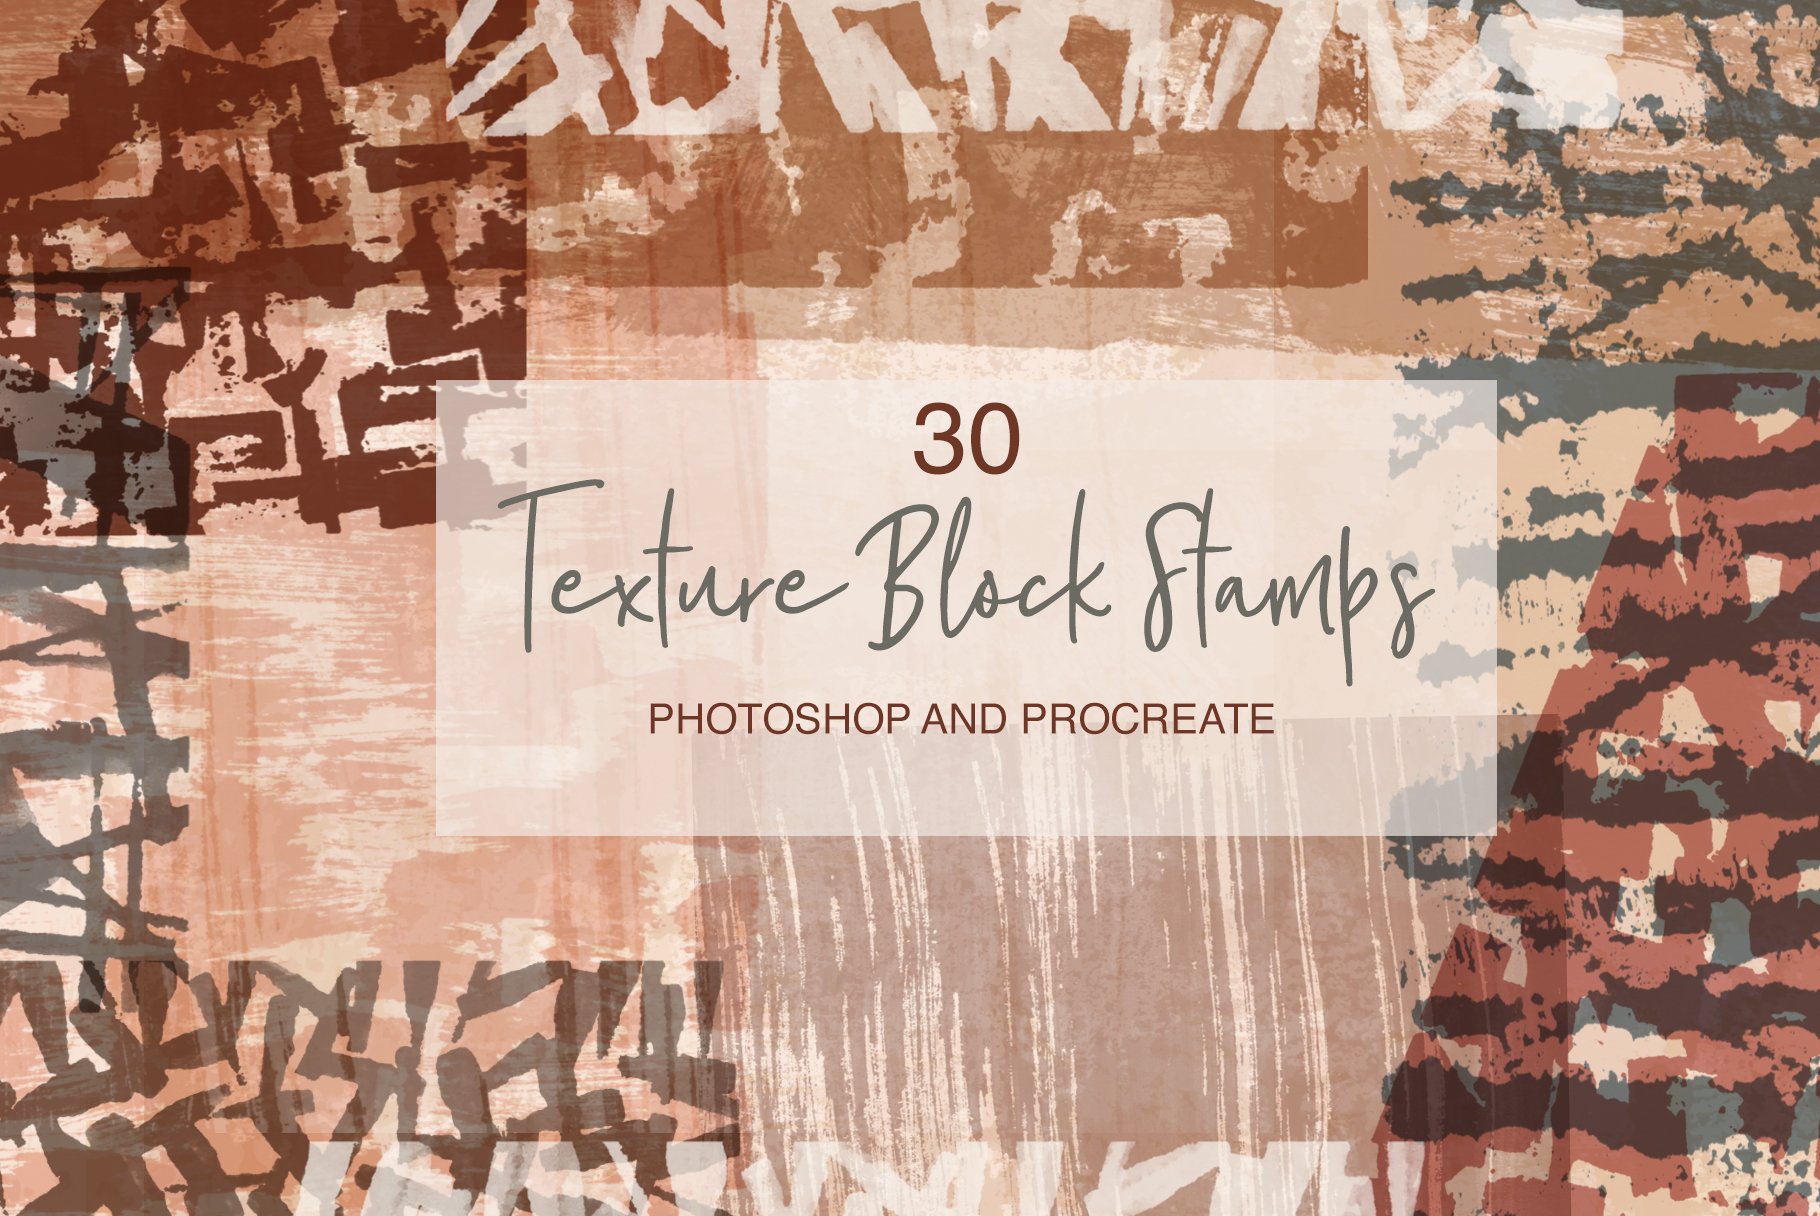 Texture Block Stampscover image.